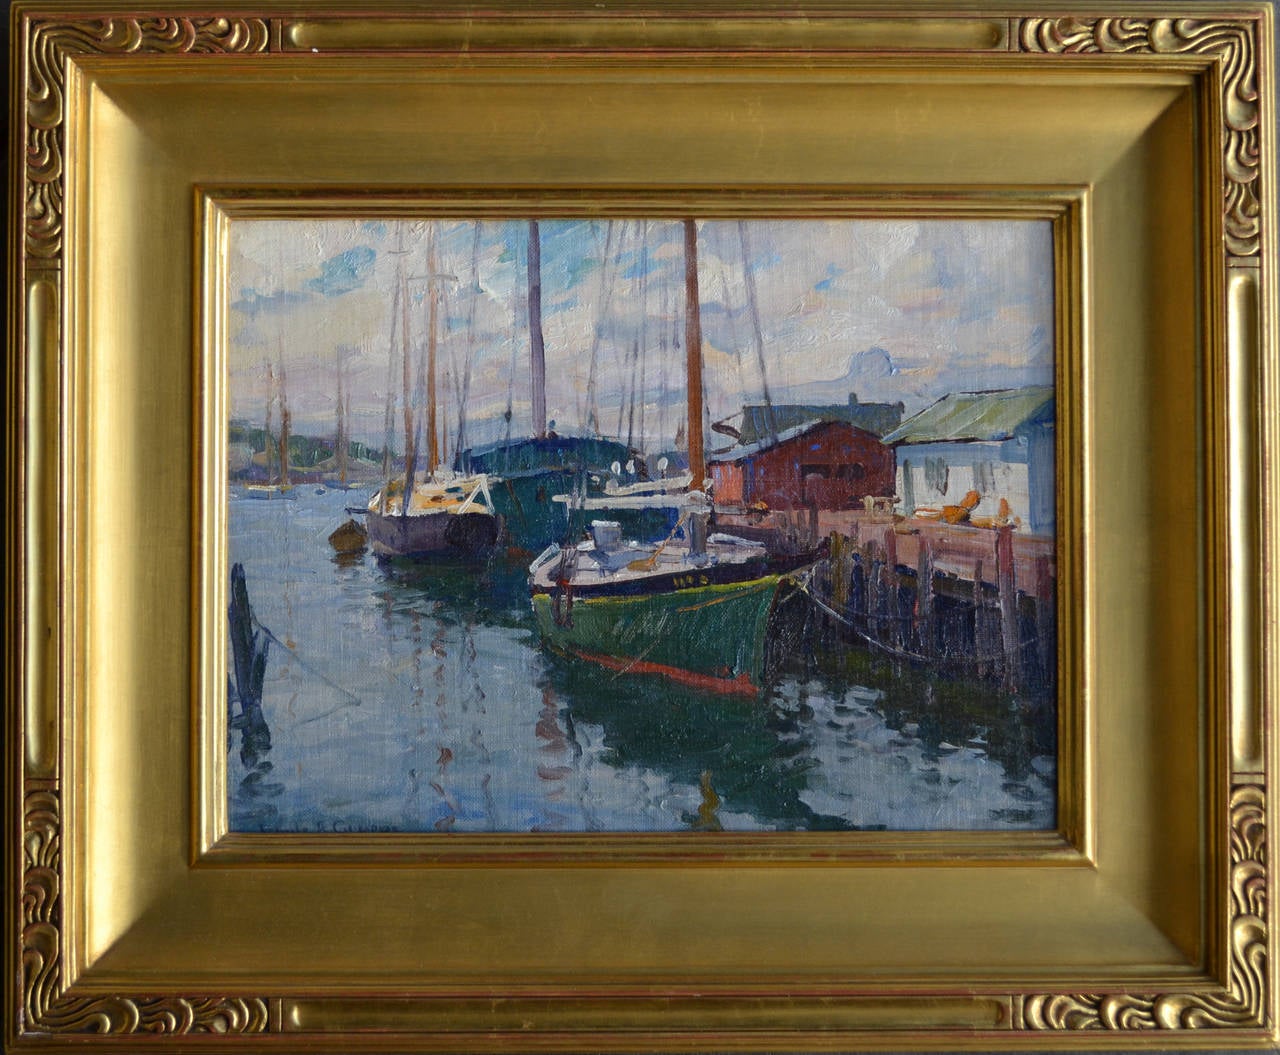 Boats in Dock, Gloucester - American Impressionist Painting by Emile Albert Gruppe